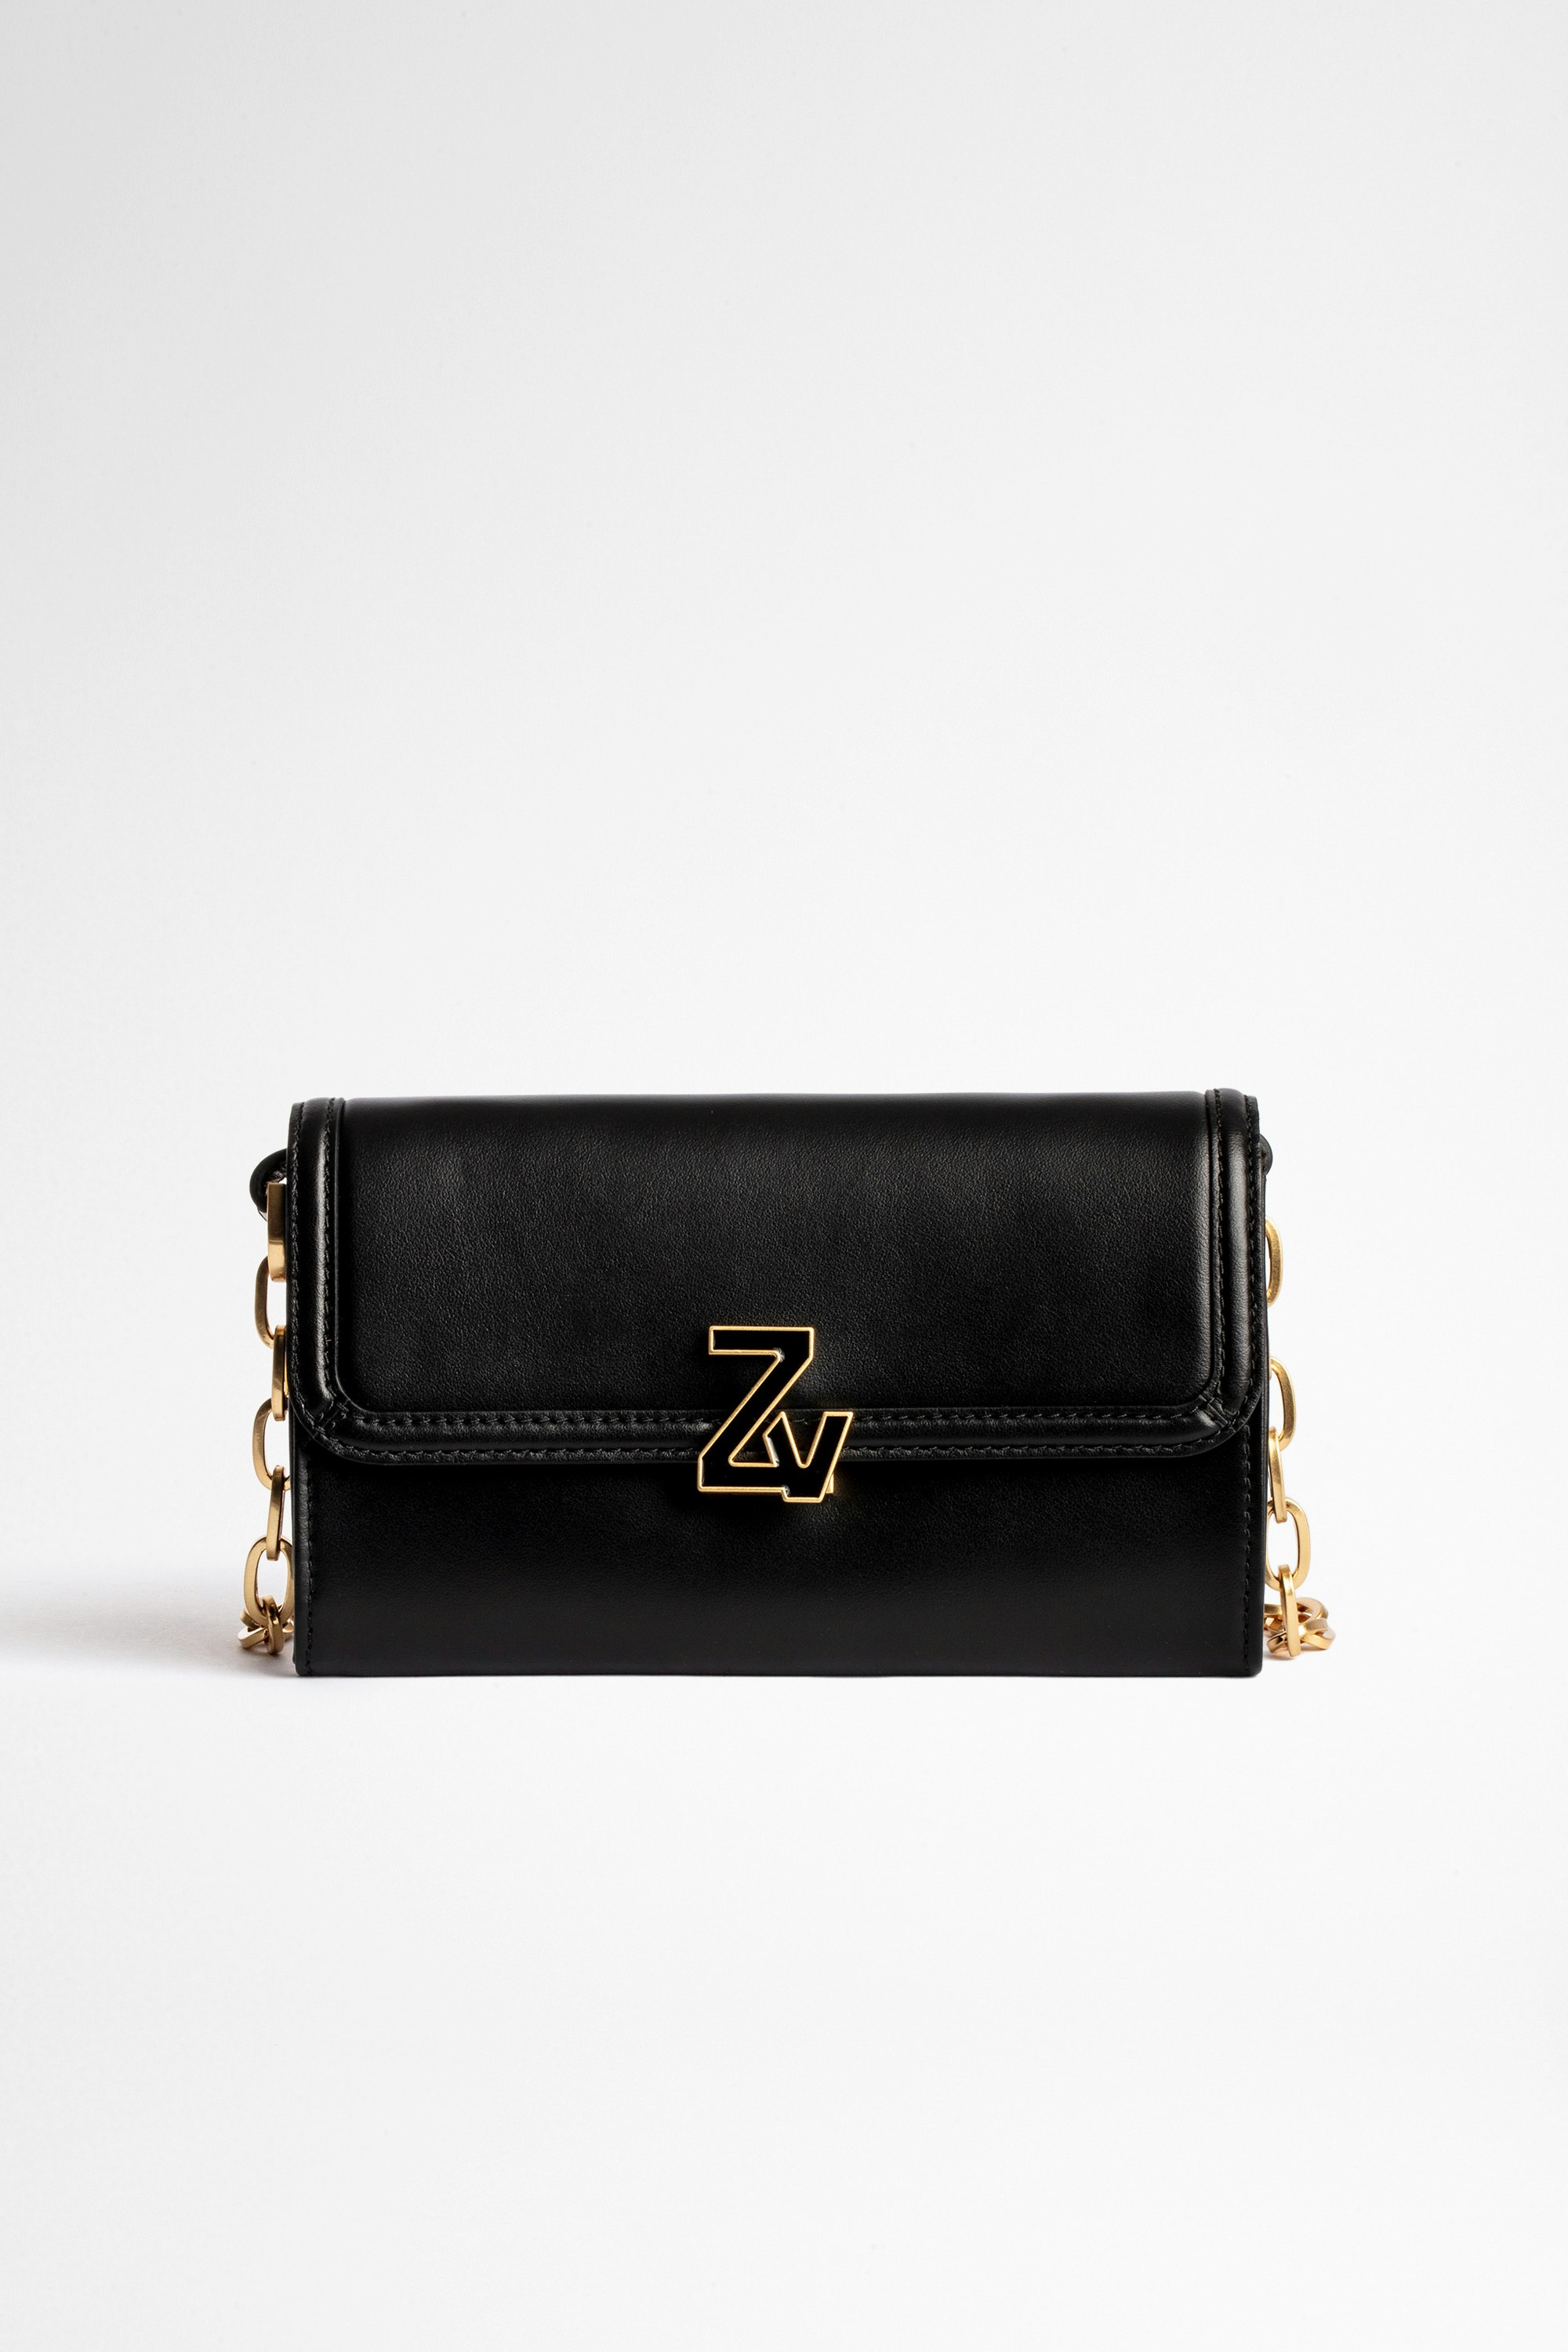 ZV Initiale Le Long Unchained Wallet-Style Clutch Women's ZV Initiale black leather wallet with chain